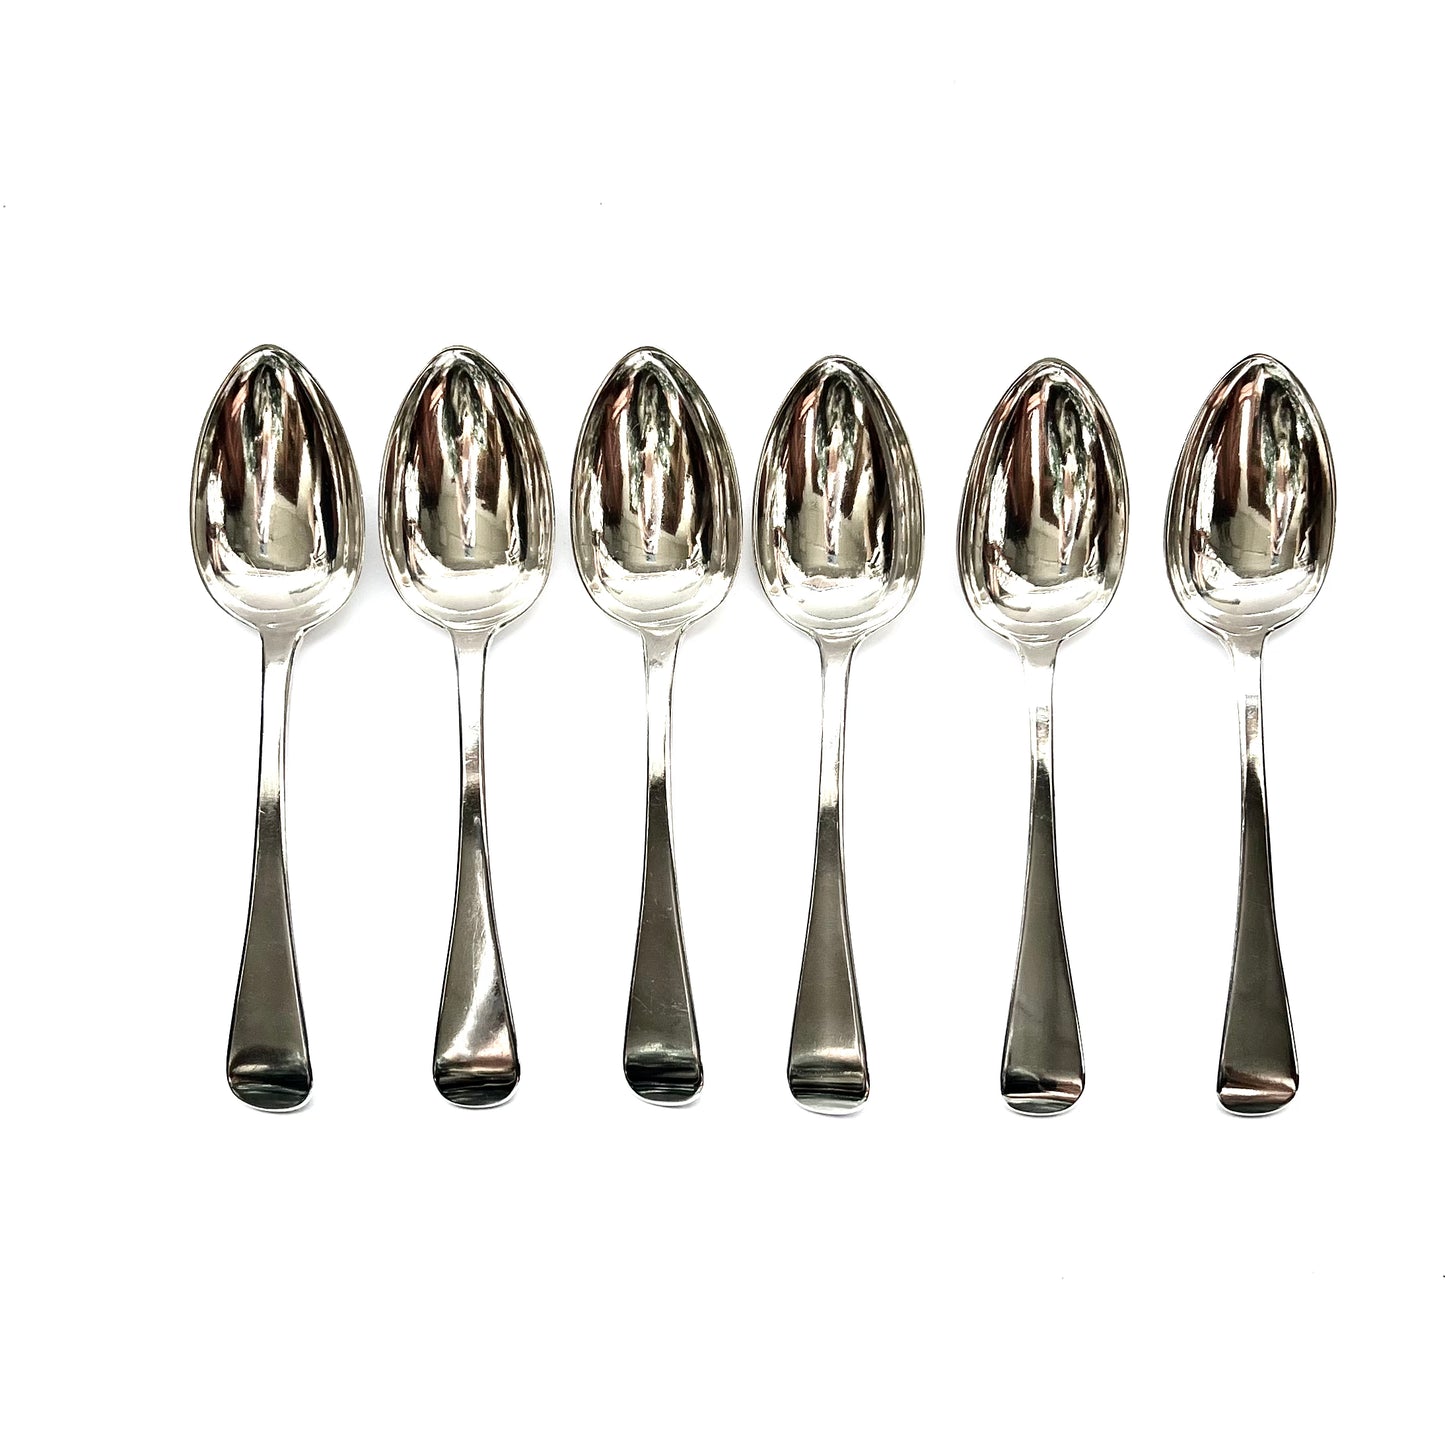 6 George IV sterling silver table spoons in the pattern, with marks for Clement Cheese, 1828, London